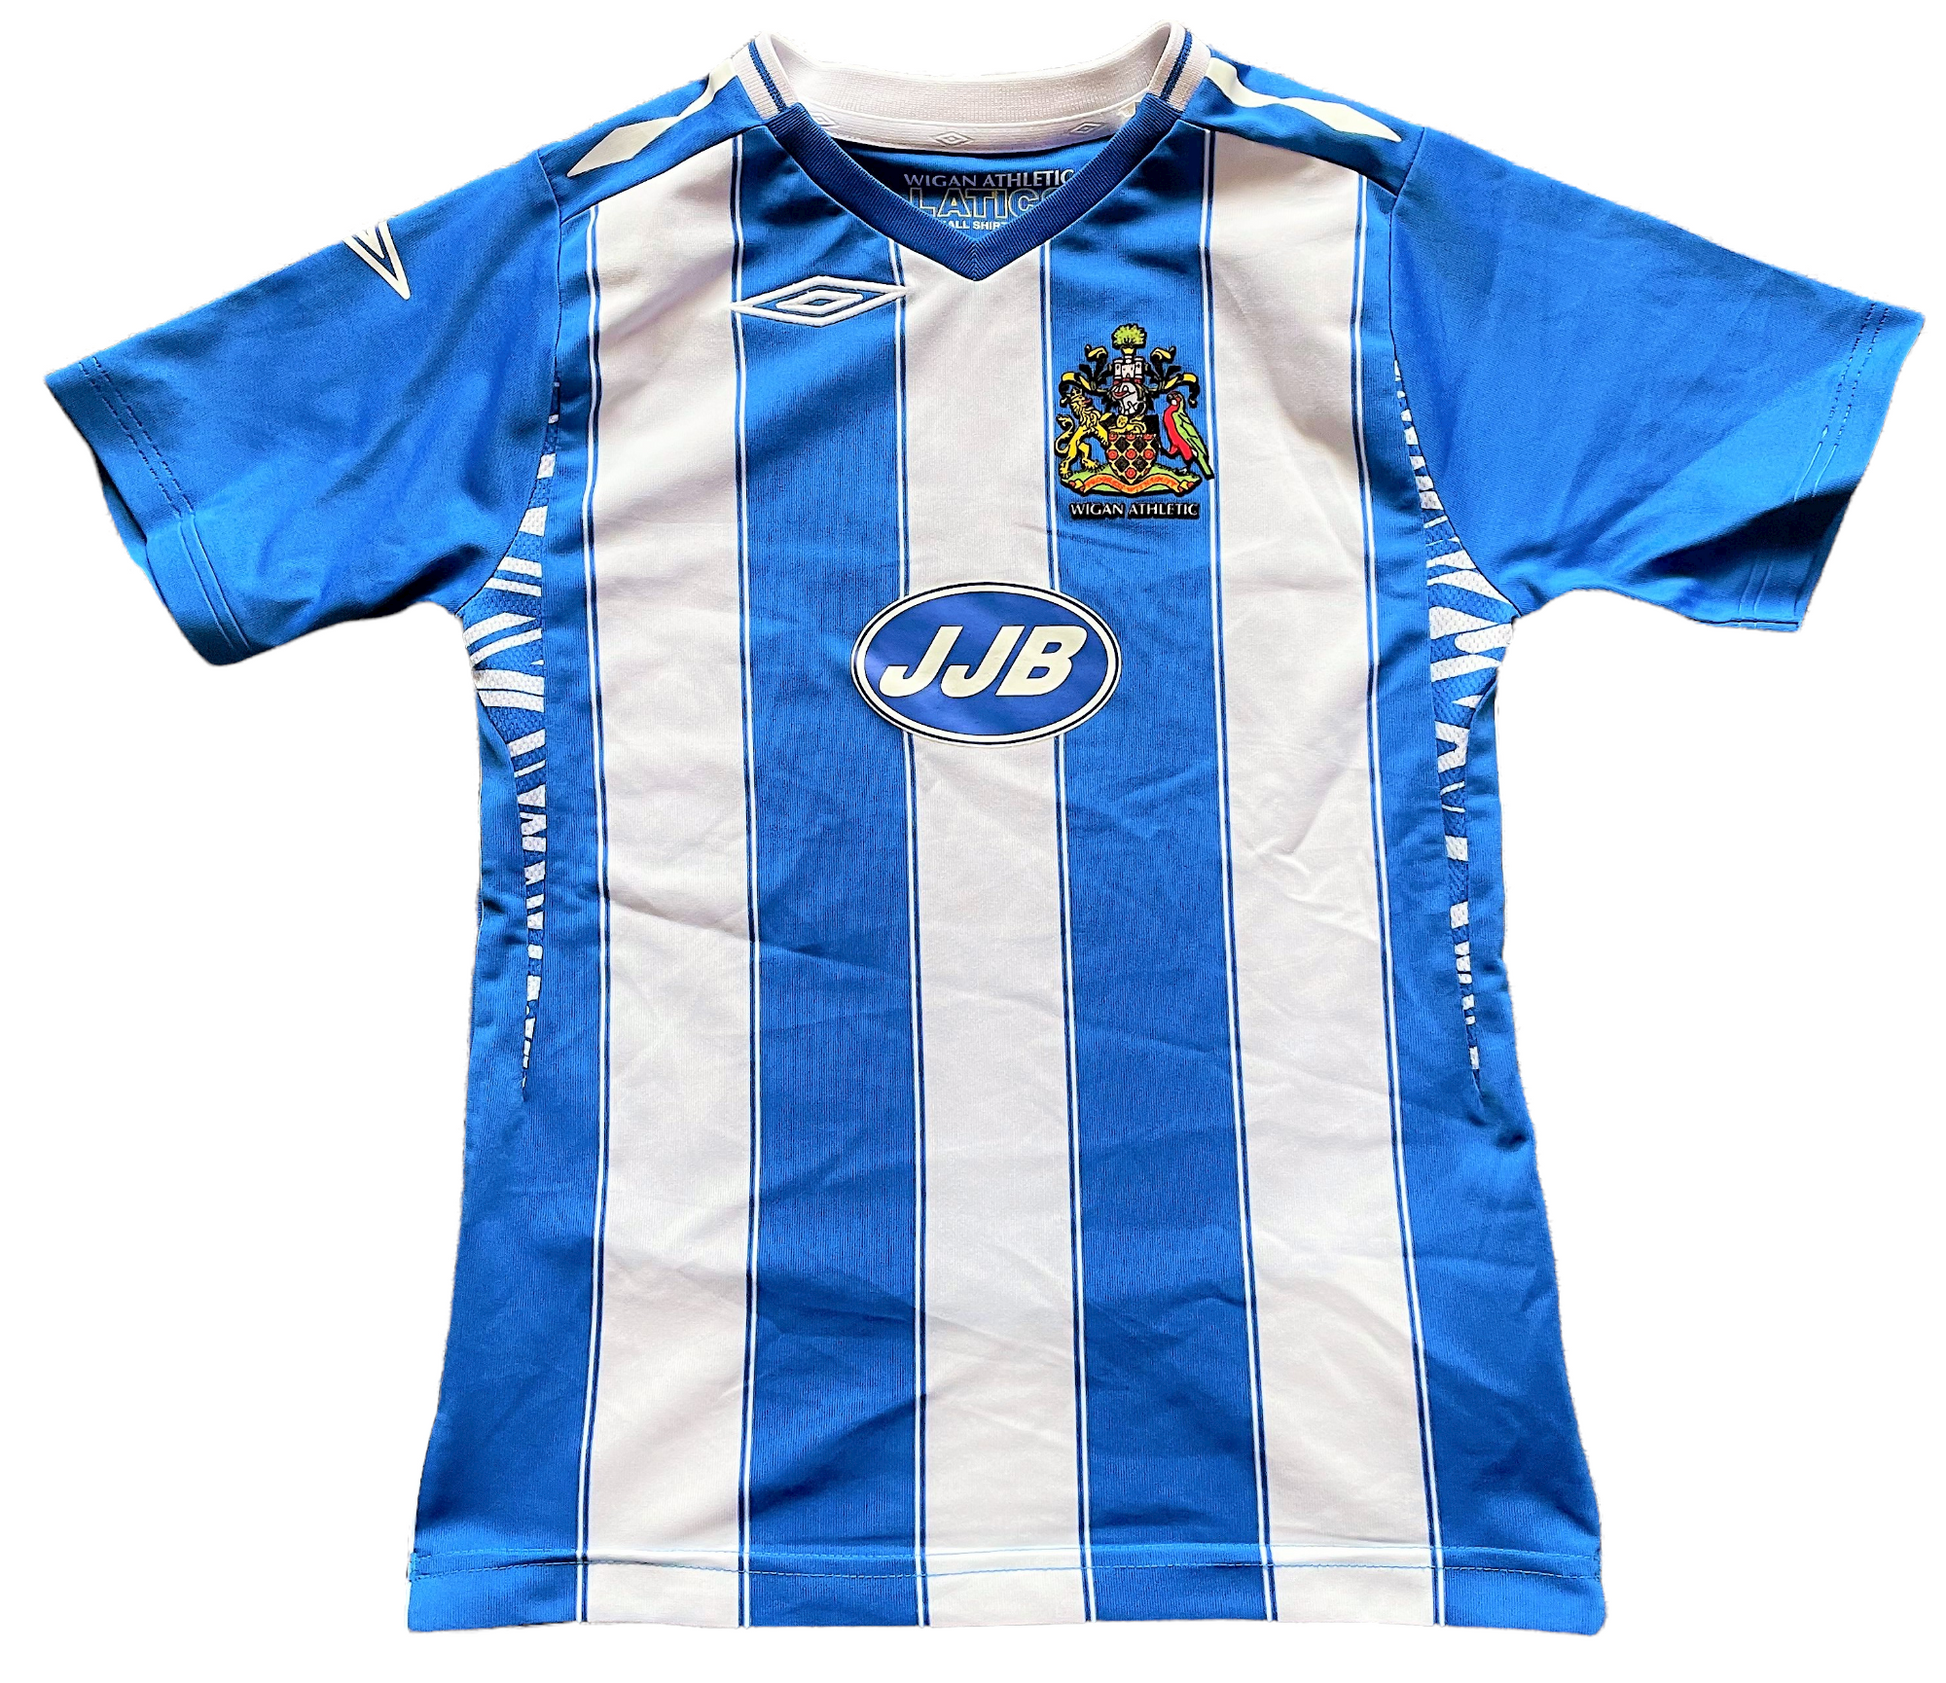 2007-08 Wigan Home Shirt (excellent) 6 to 7 years